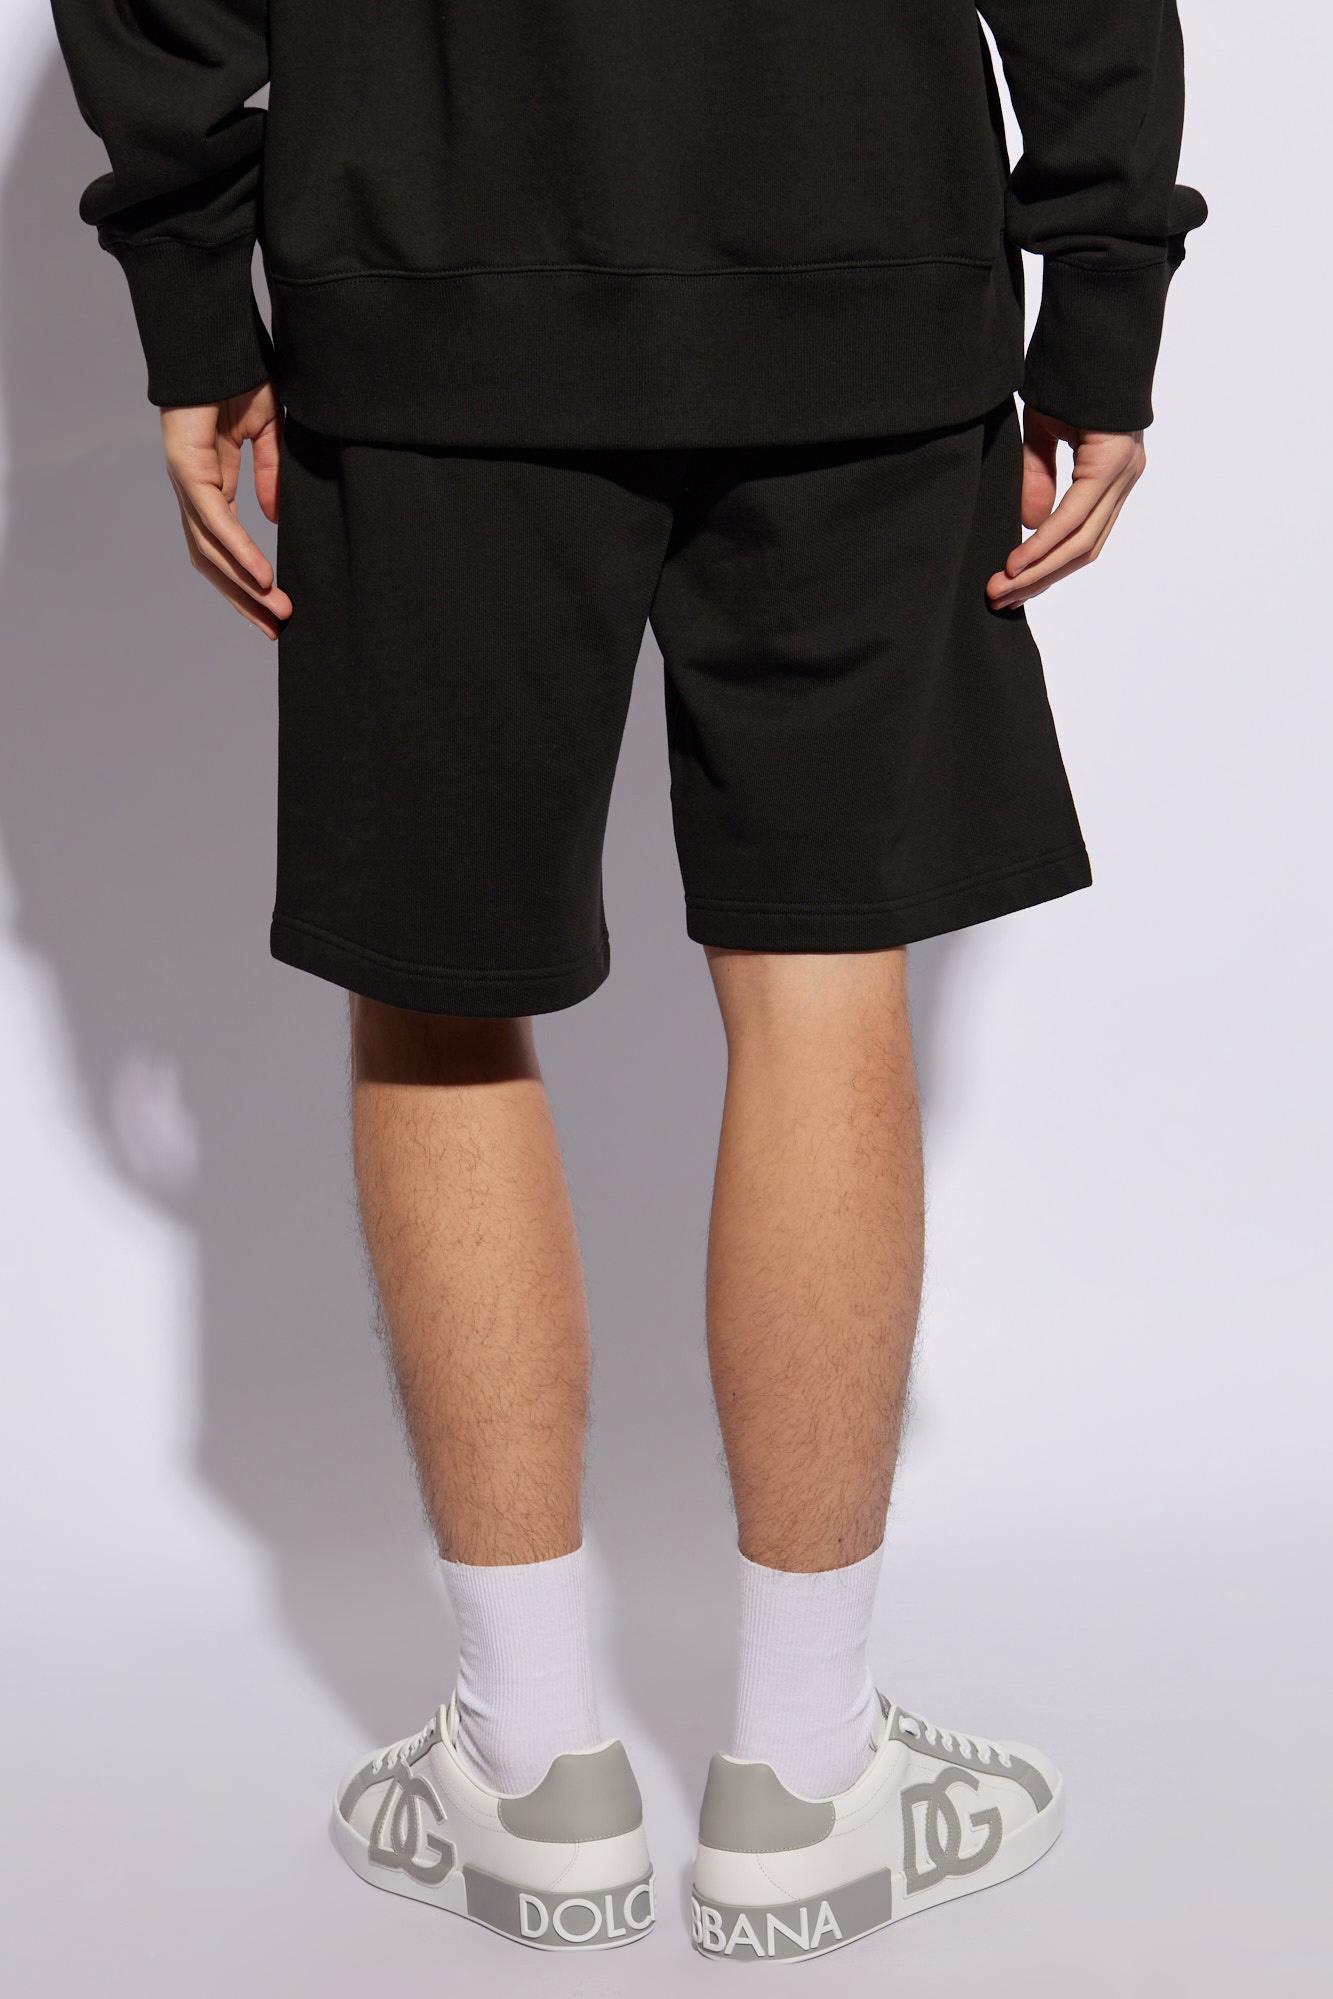 Shop Kenzo Cotton Shorts With Logo In Black